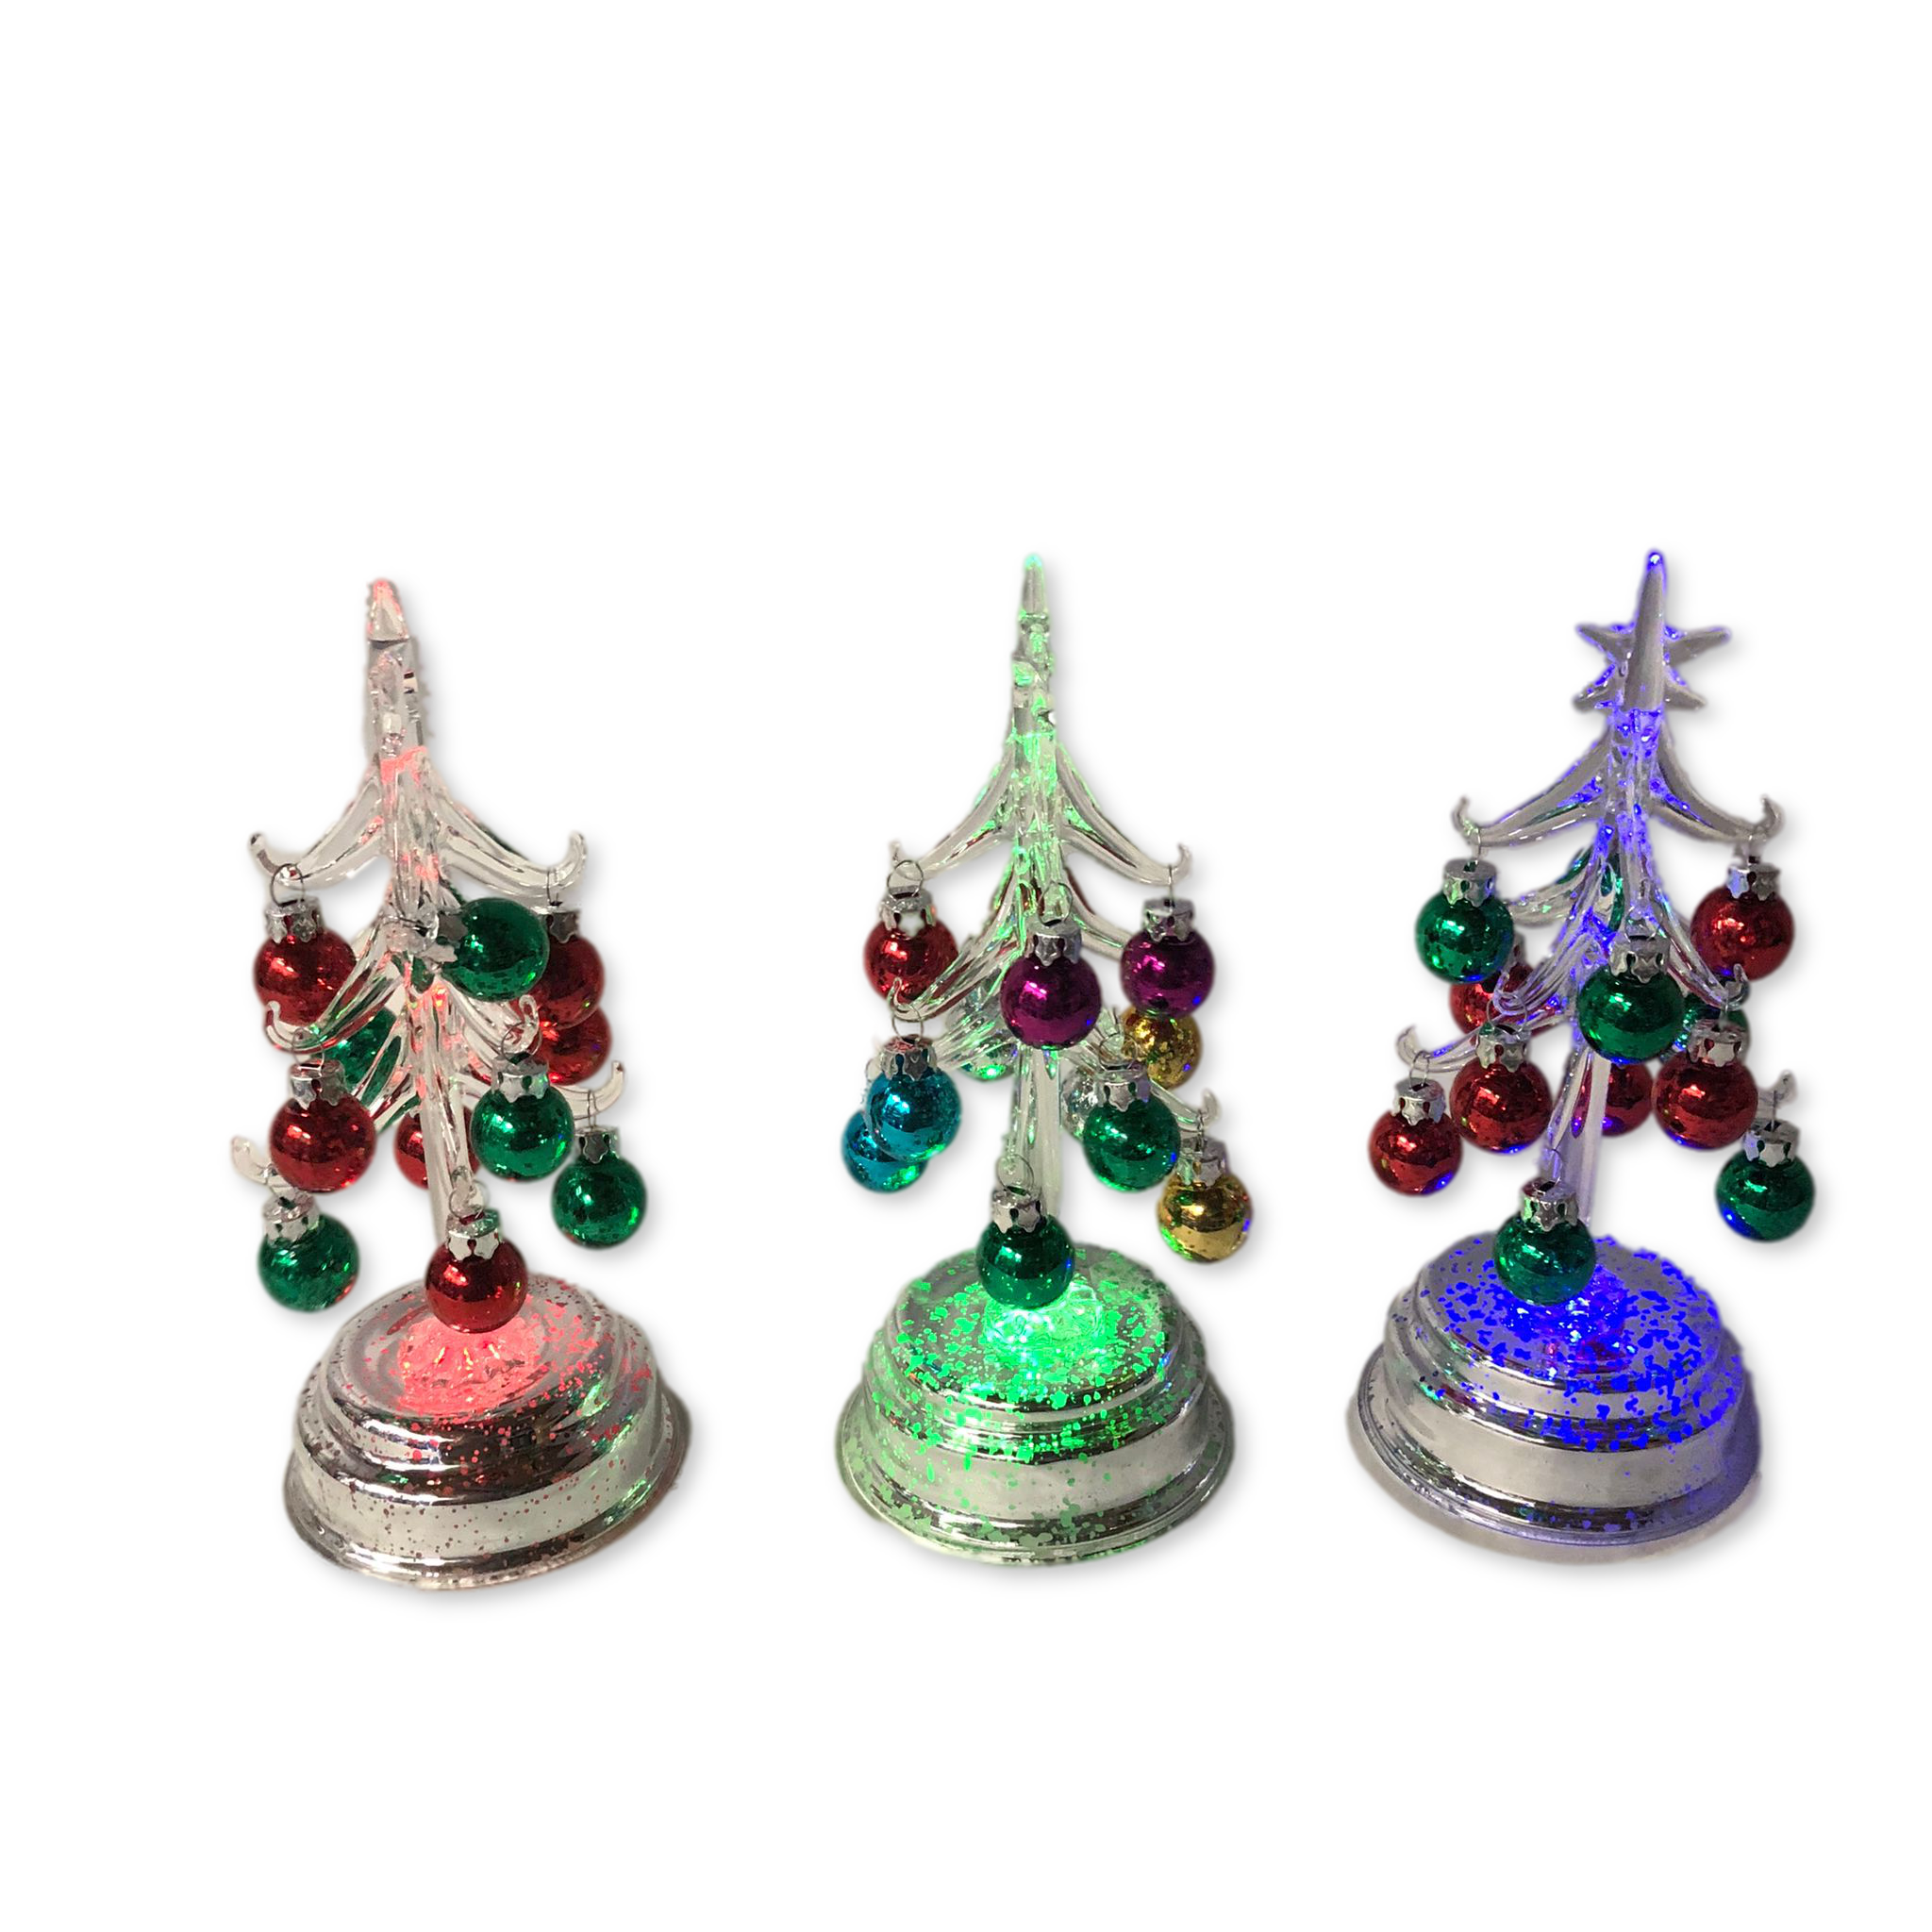 Kringle Express S/3 Glass Trees w/ Mercury Glass Base and Ornaments